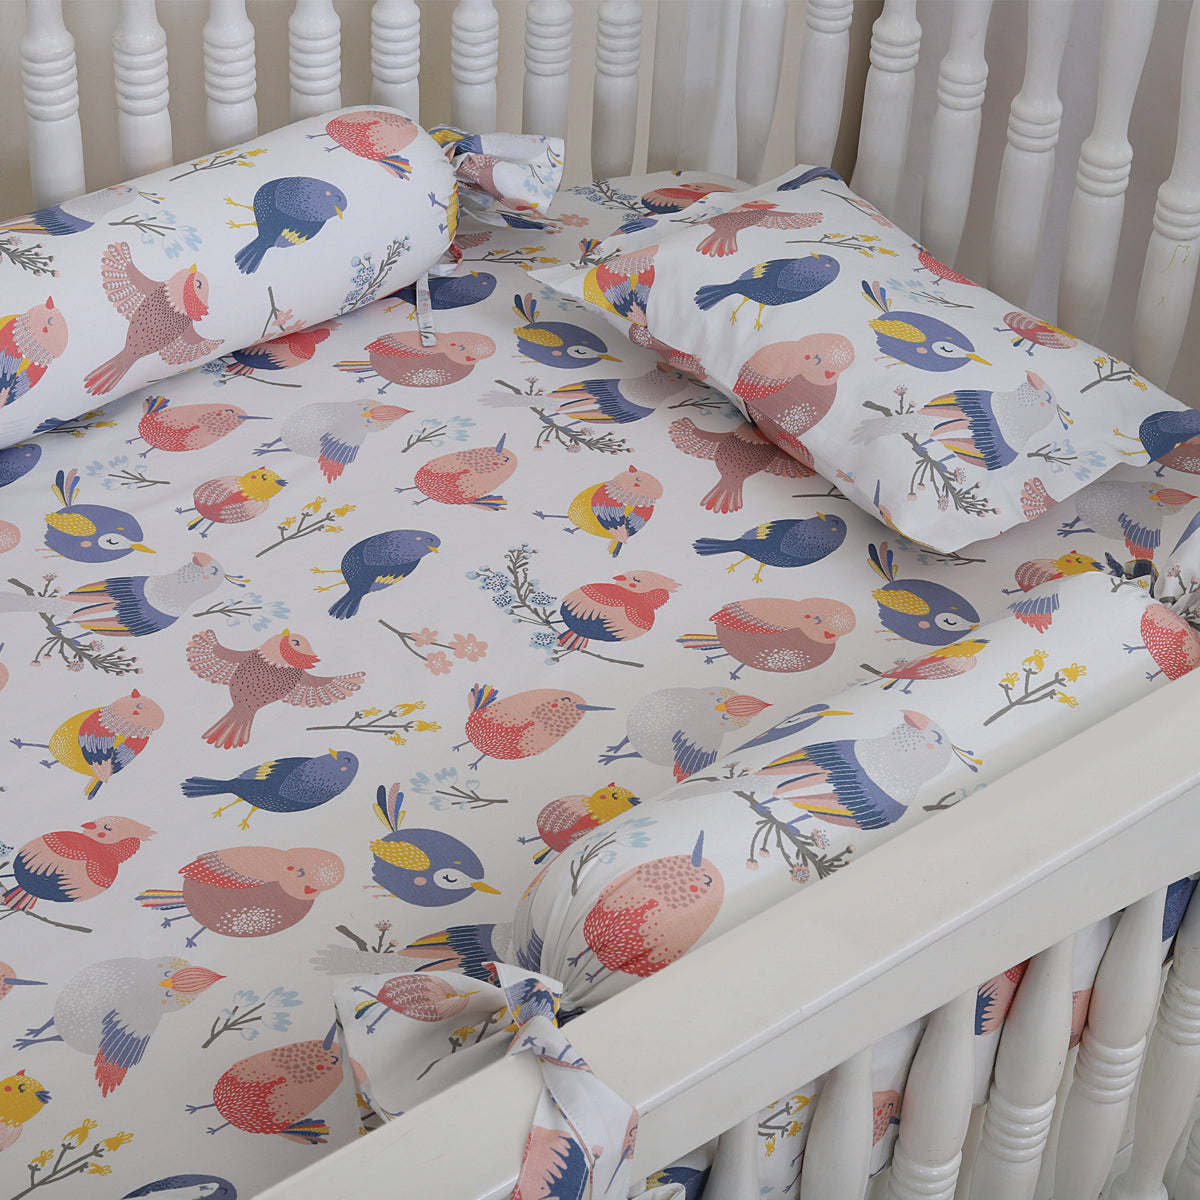 Chirpy bords Cot Fitted Sheet